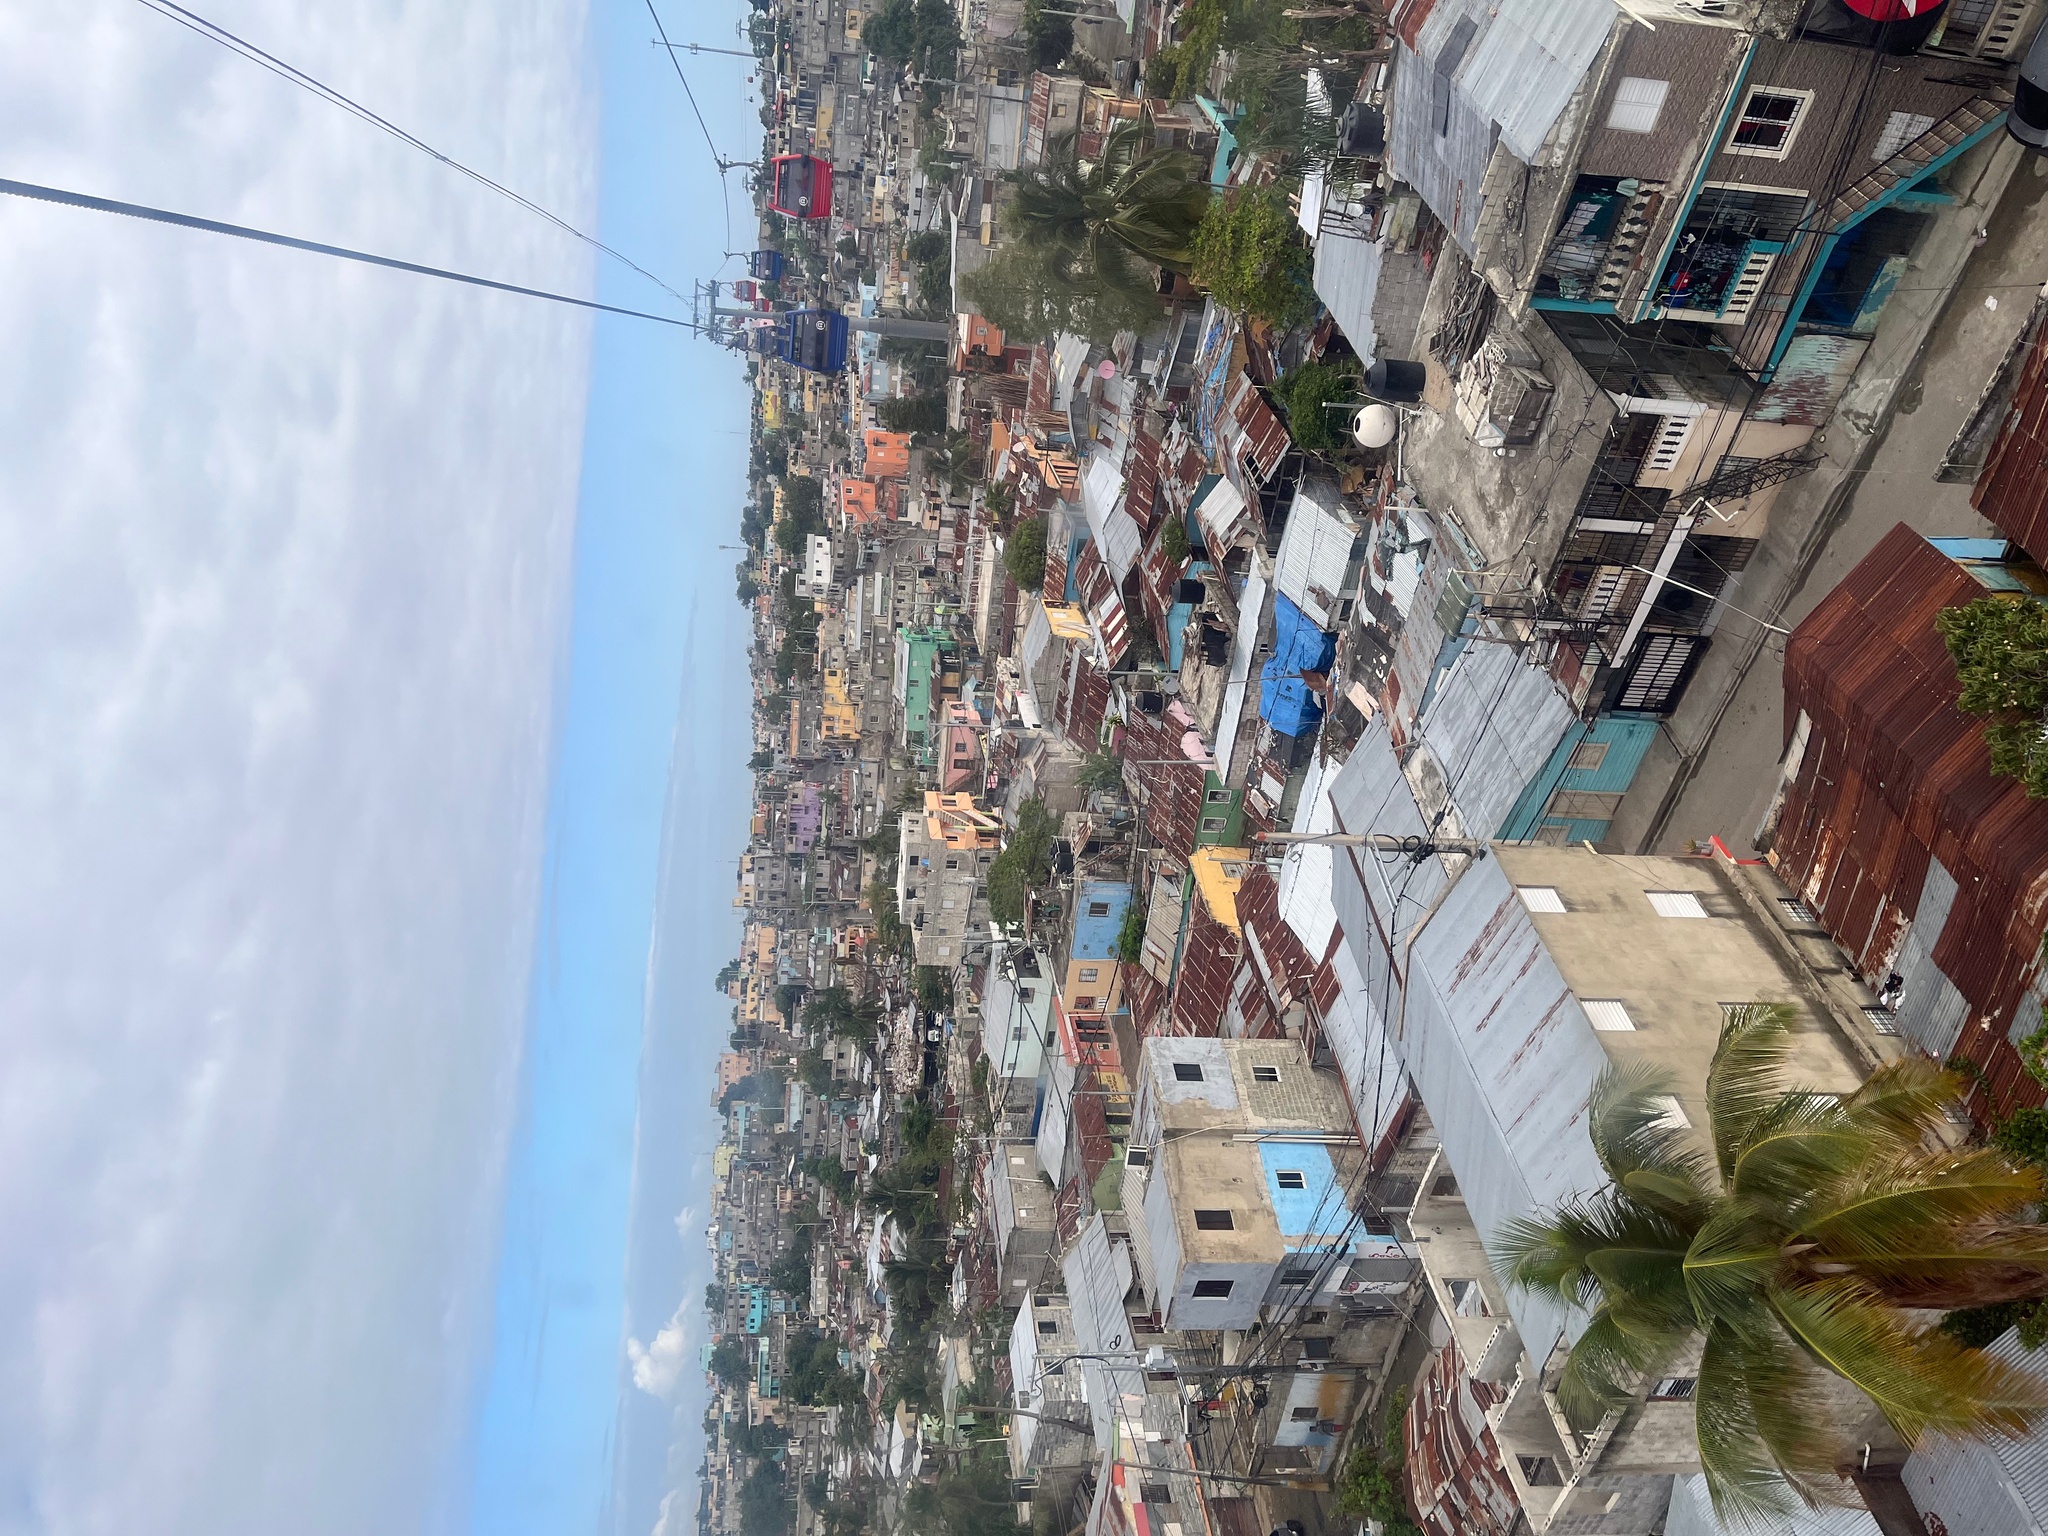 A neighborhood in the Dominican Republic seen from above, taken from the gondola of an aerial tram. The buildings are painted soft blue and pinks. On the horizon is a strip of light blue sky with light gray clouds above it. 